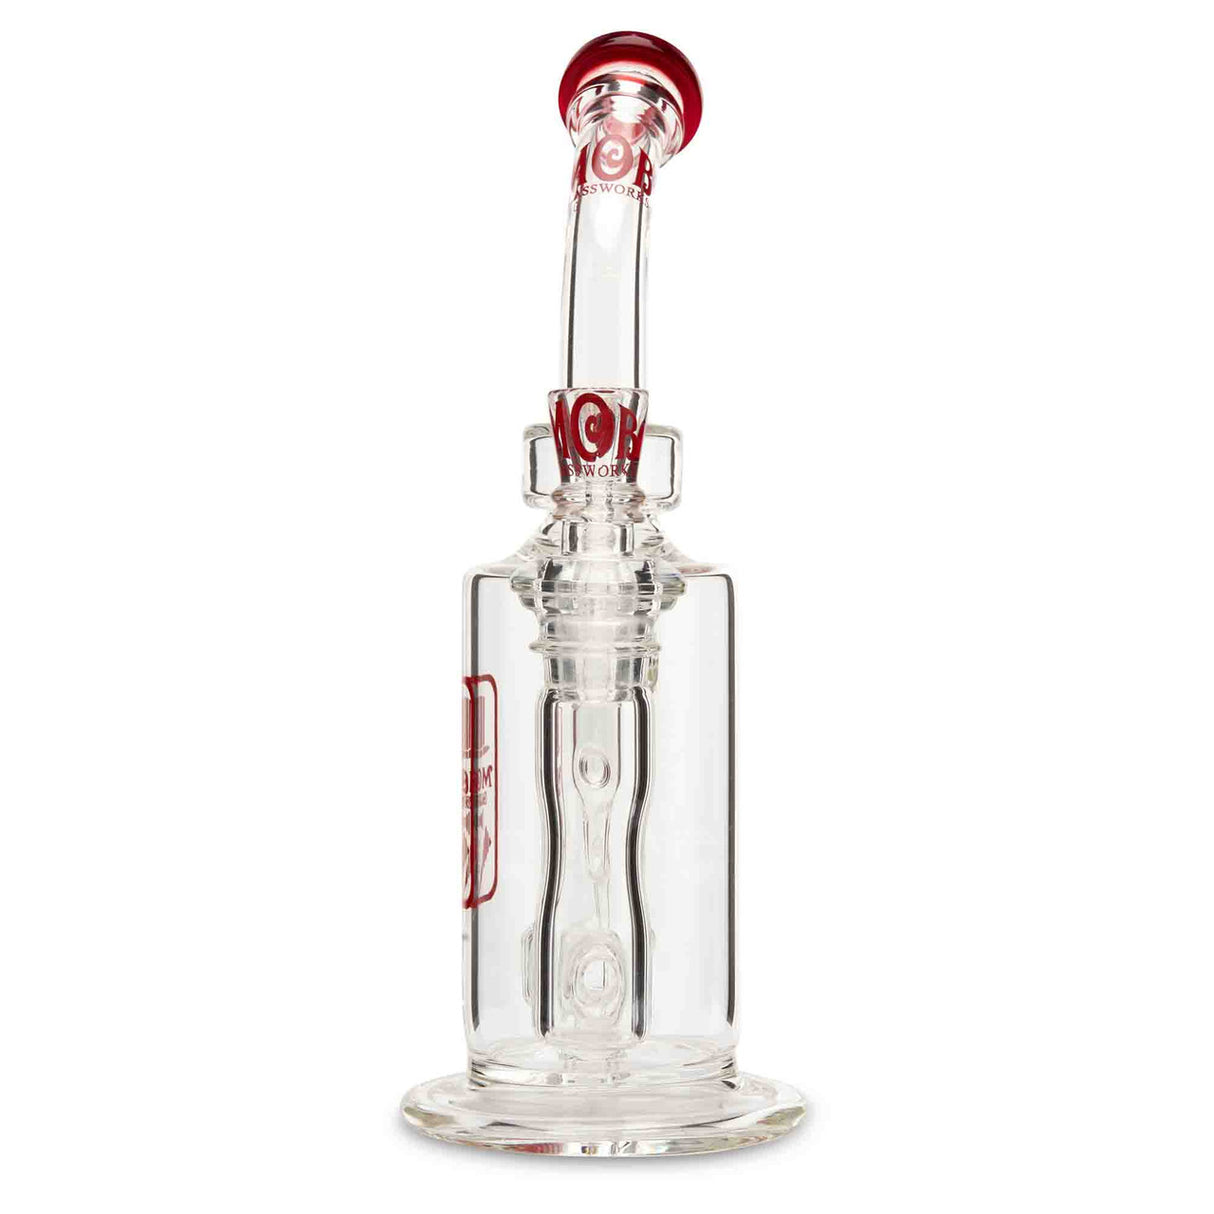 MOB Glass Internal Klein Recycler Rig  Premium Thick Scientific Glass Red Color